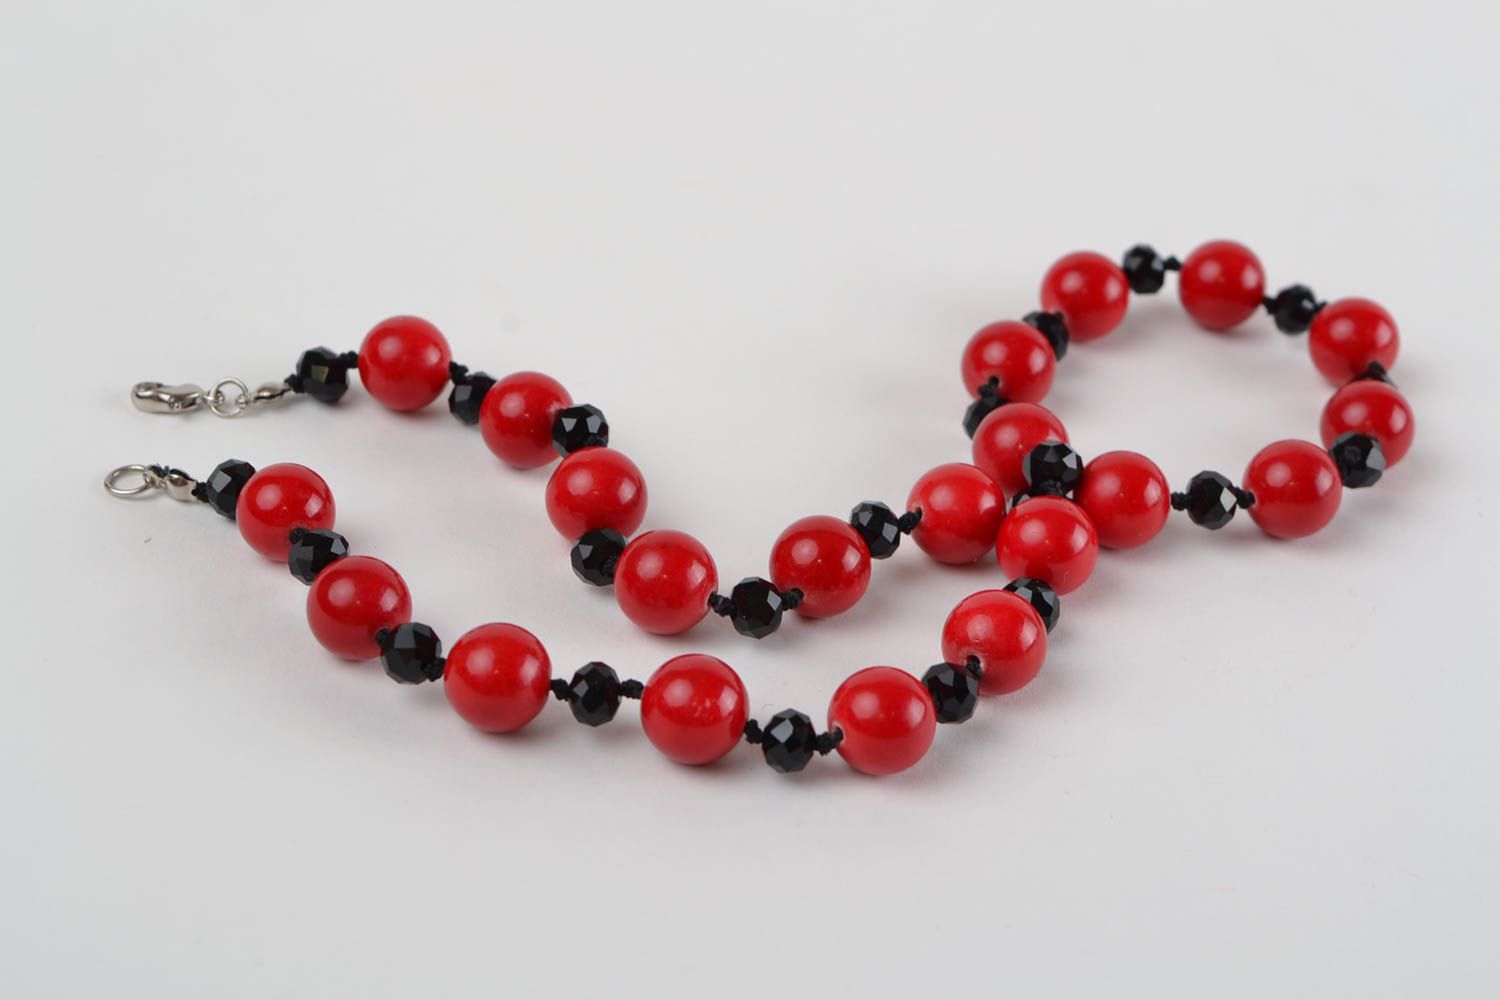 Handmade beautiful red and black necklace made of Czech beads for girls photo 2